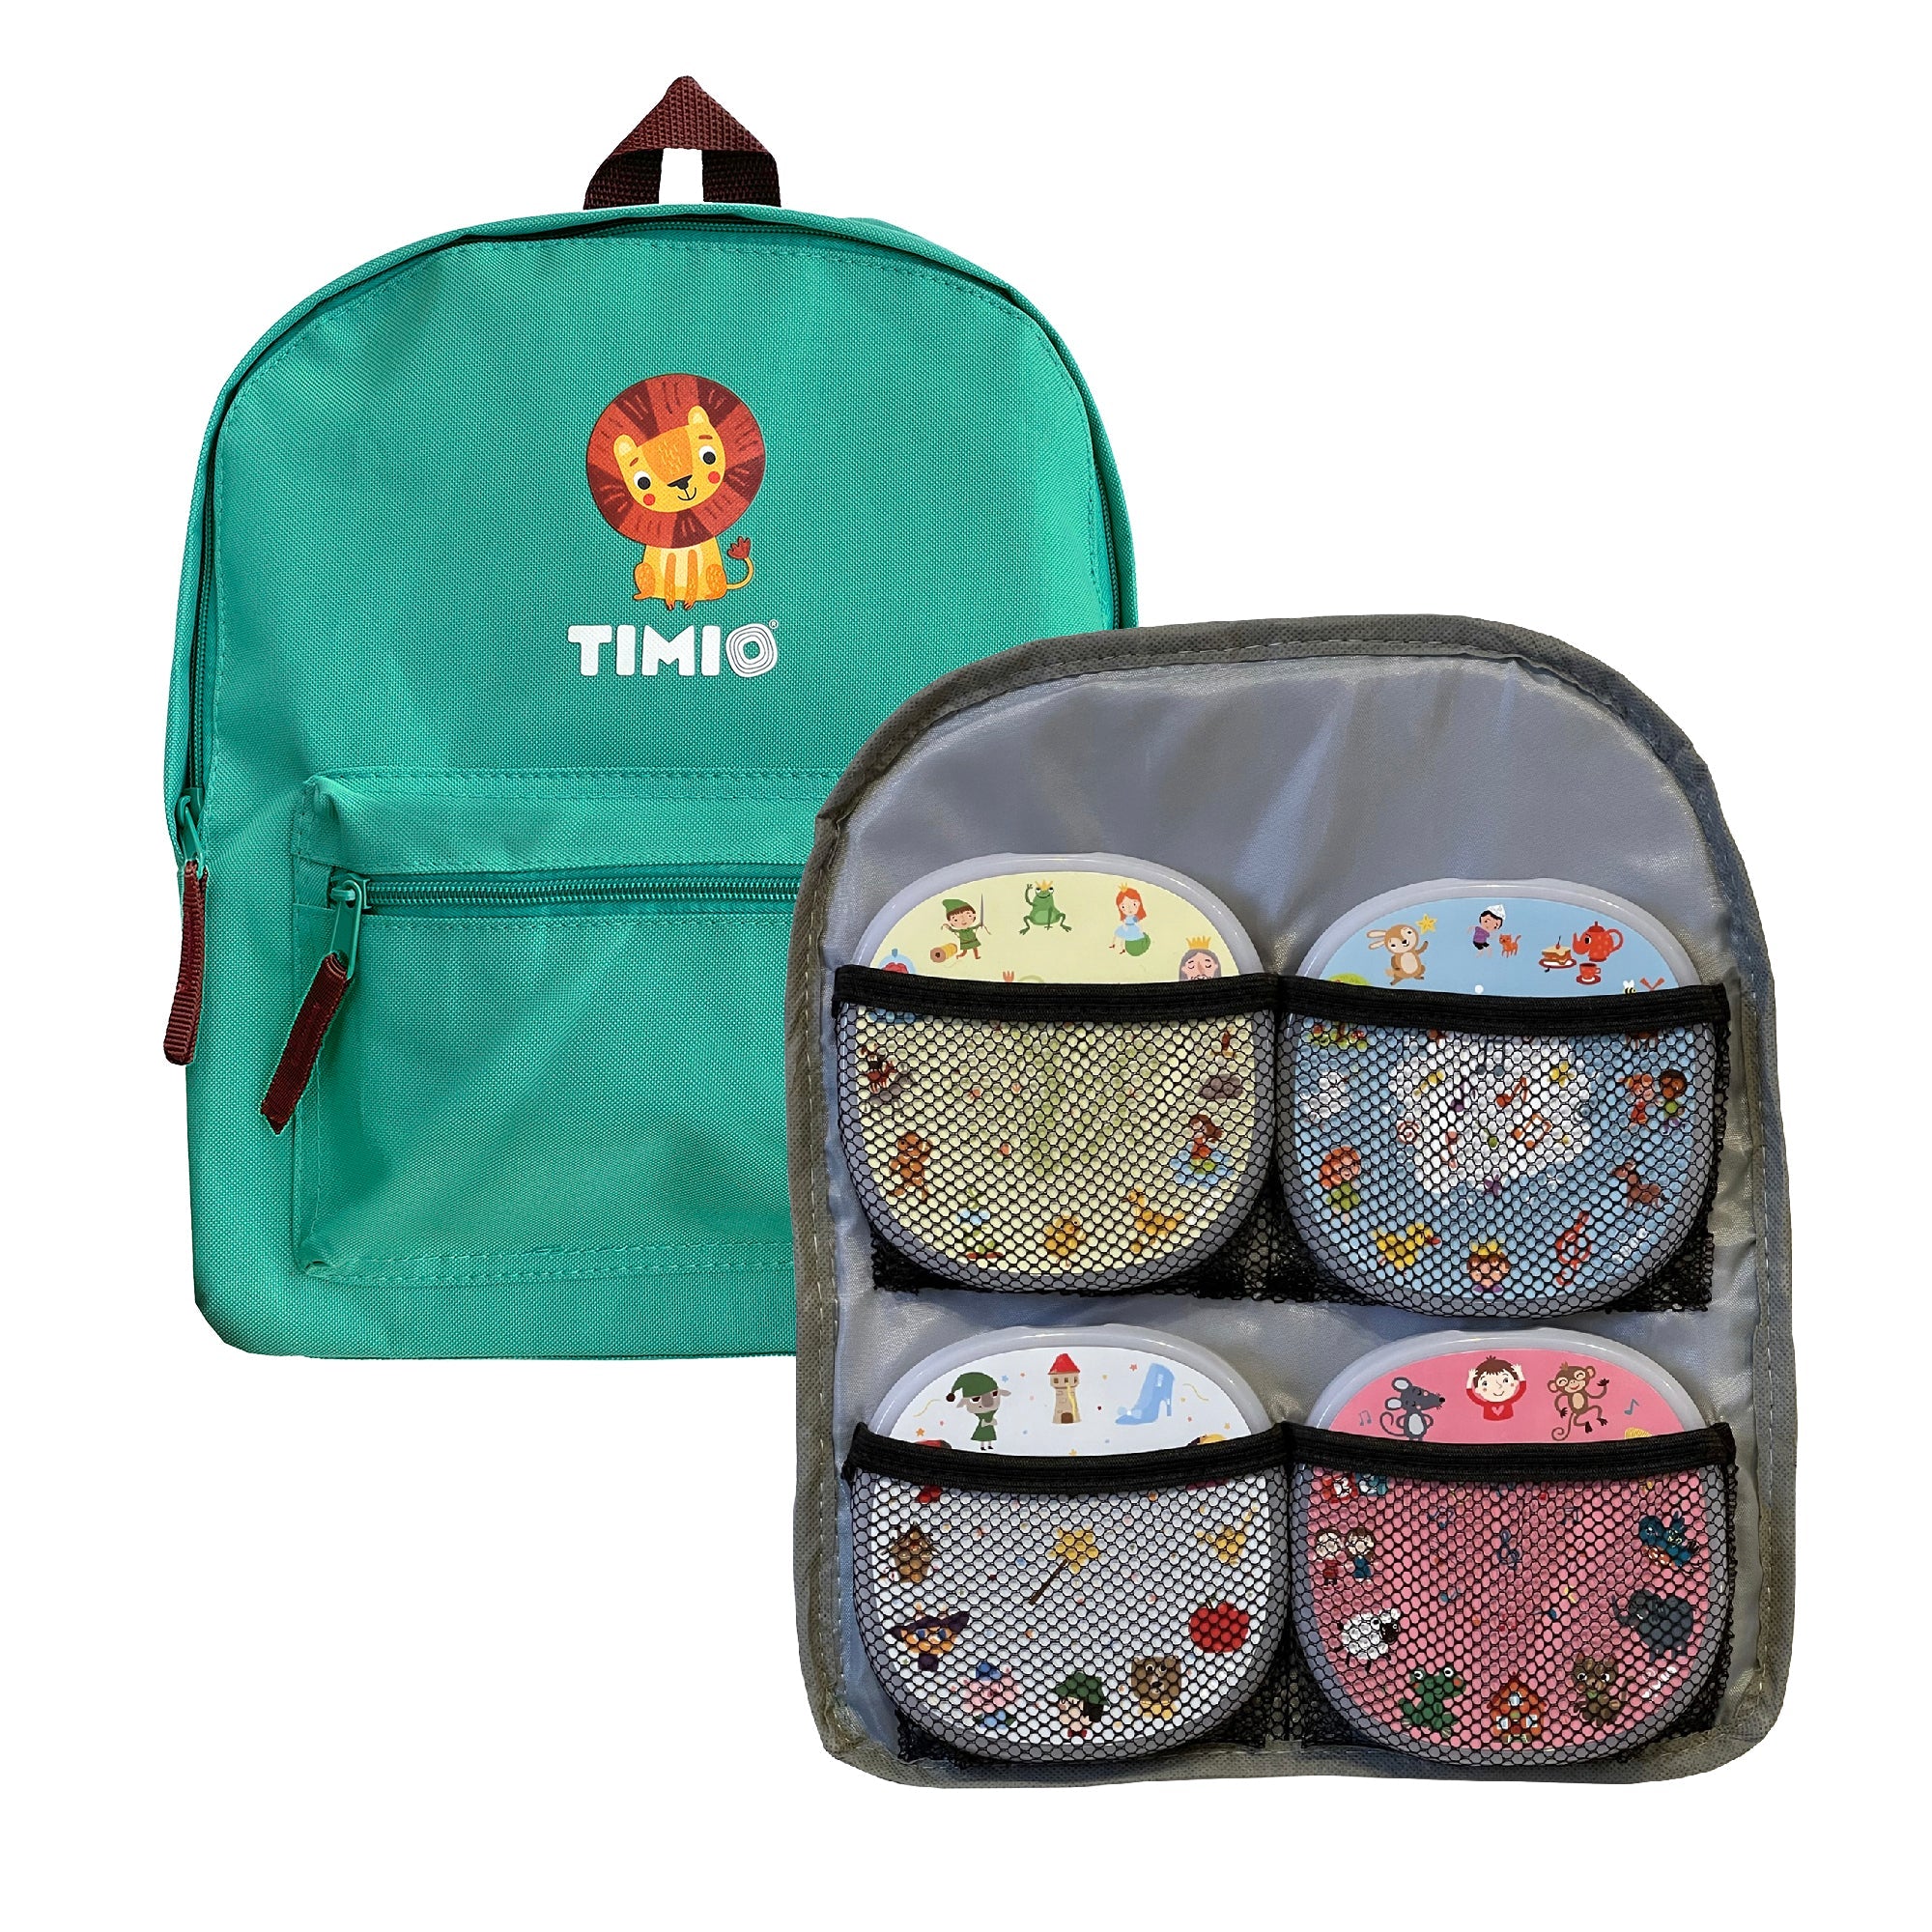 Timio: Timio backpack's backpack for player and disks